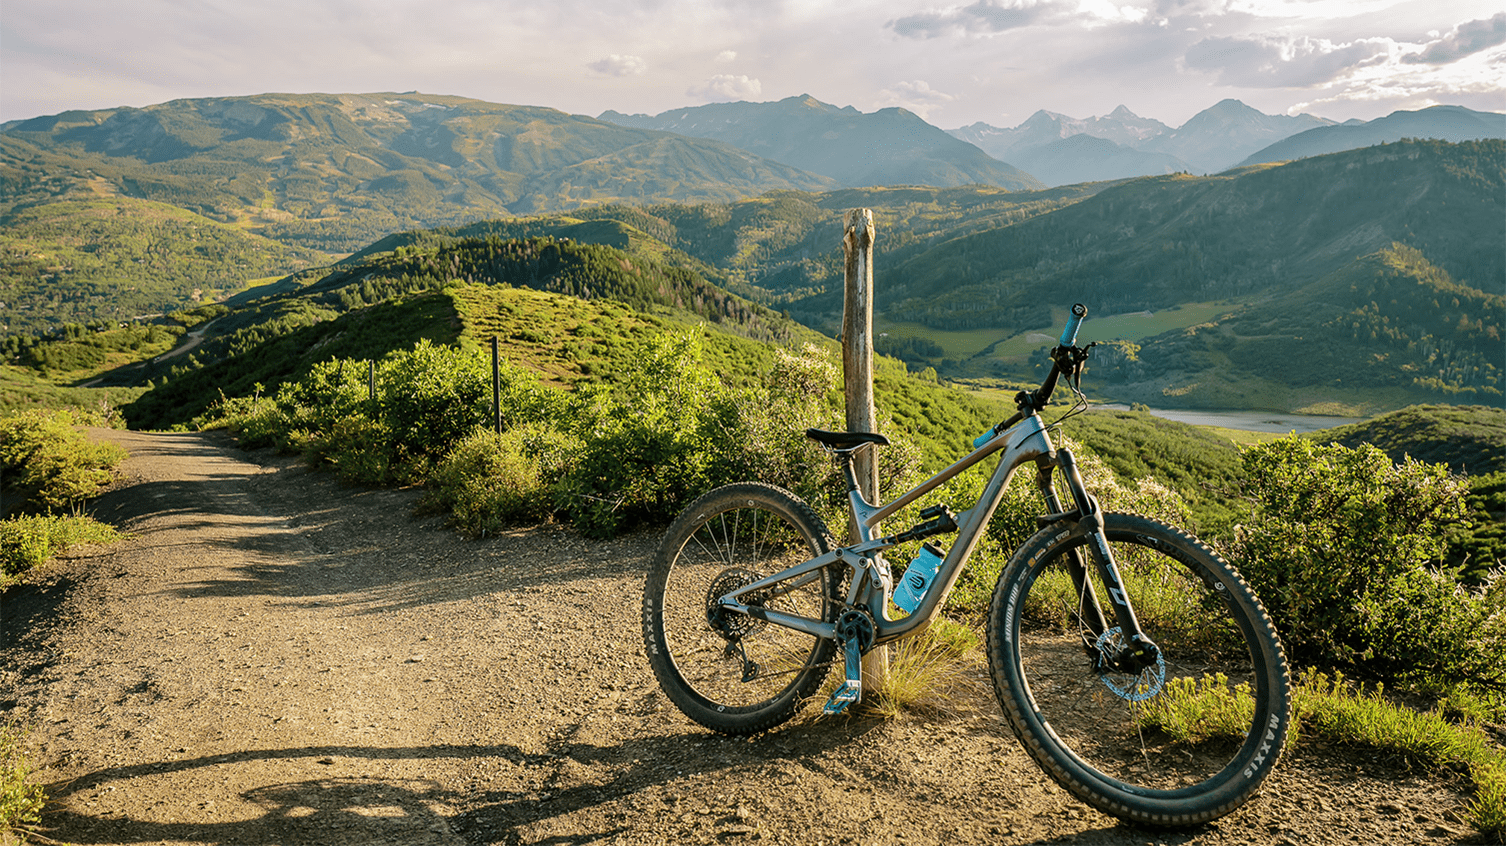 Mountain bike is propped against a pole overlooking the Aspen Snowmass Valley